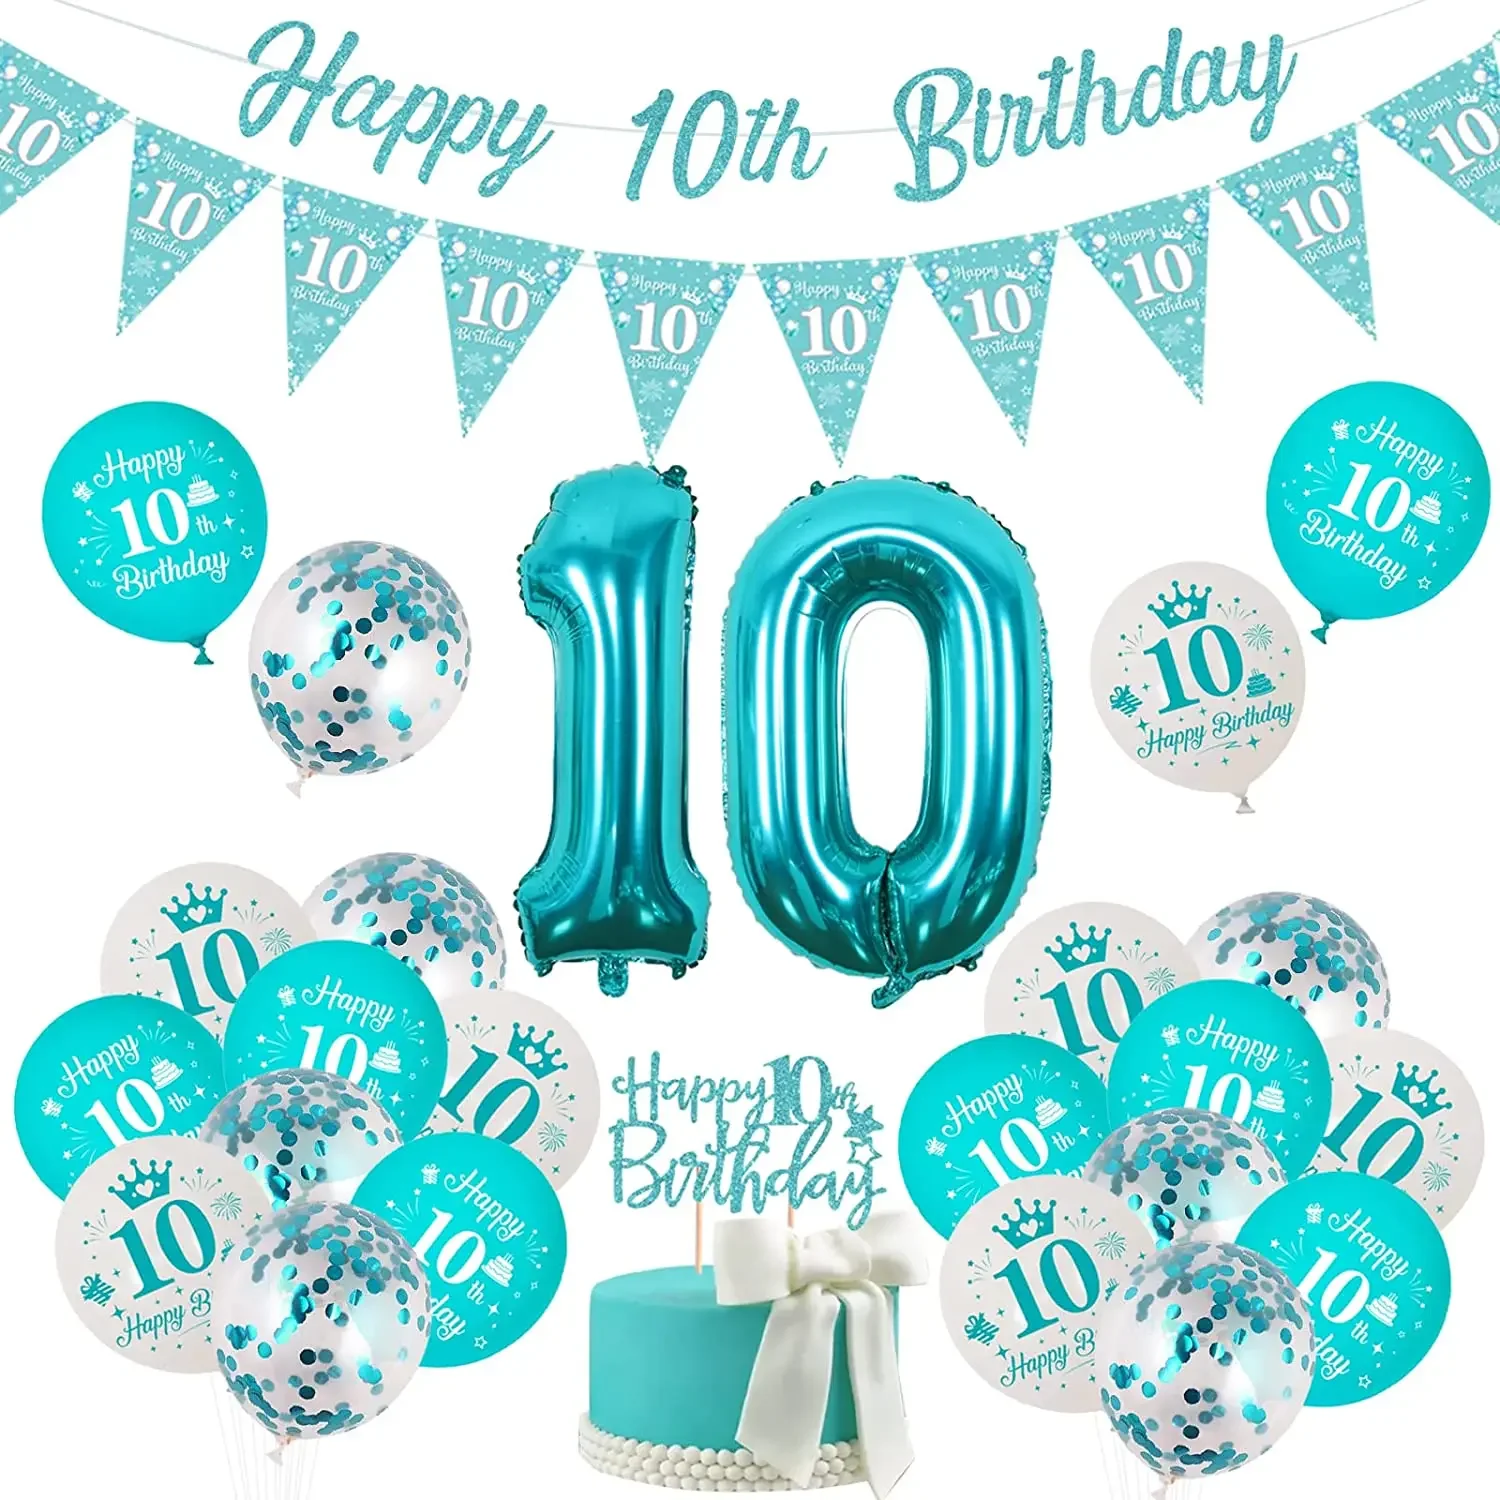 

10th Birthday Party Decorations Girls Teal Blue Double Digits Bunting Banner Blue Balloons 10 Year Old Birthday Party Supplies